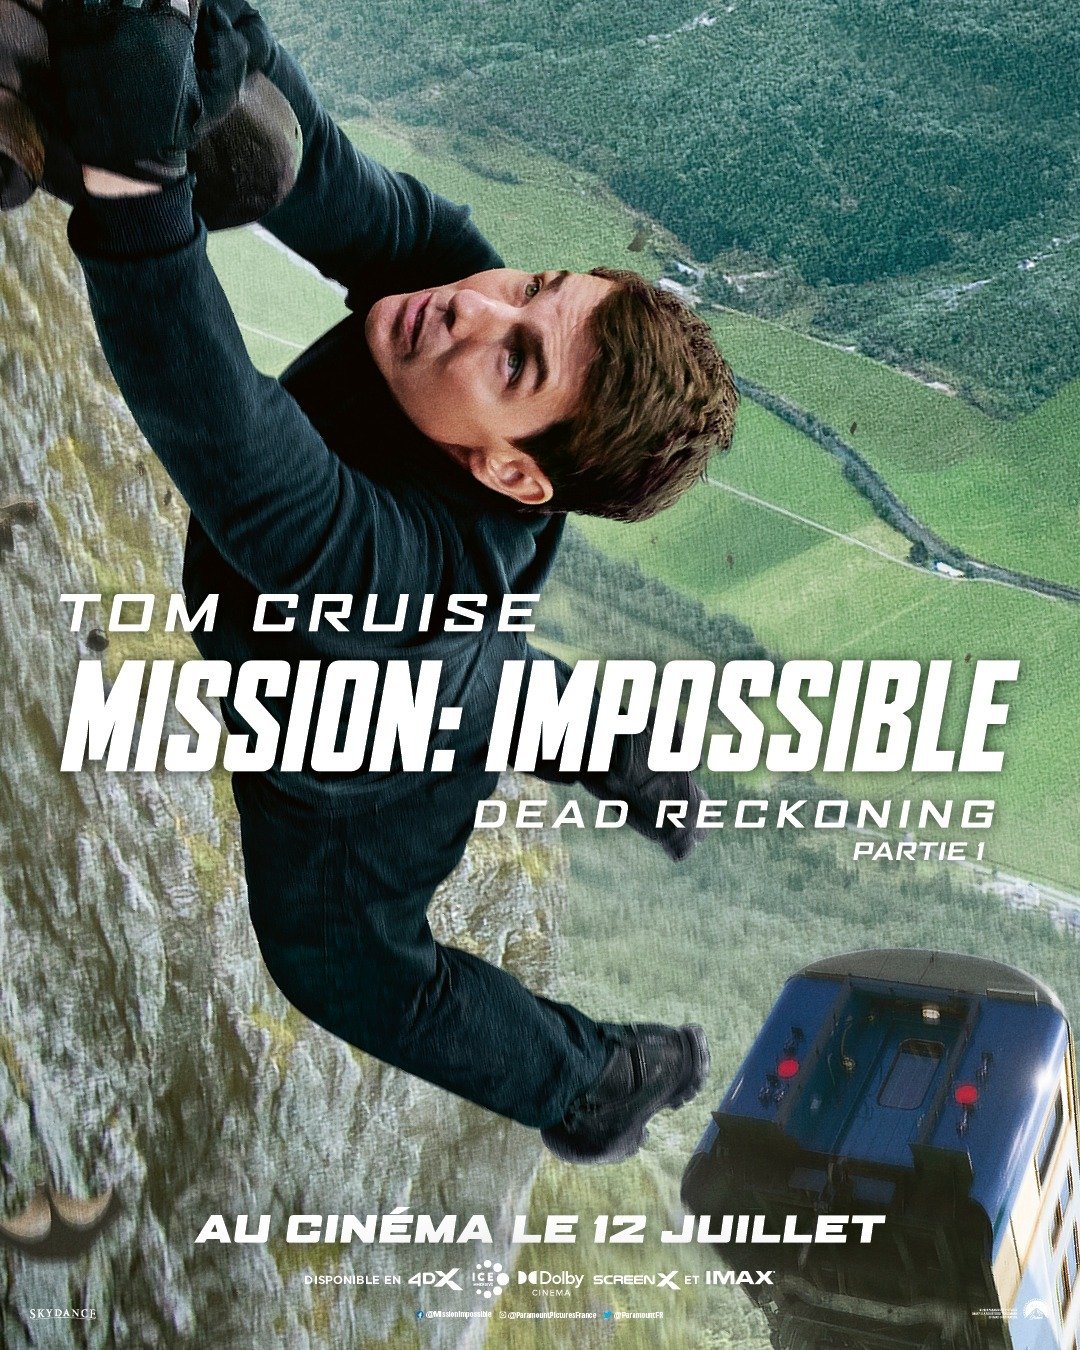 Mission: Impossible – Dead Reckoning Partie 1 - film 2023 streaming VF gratuit complet